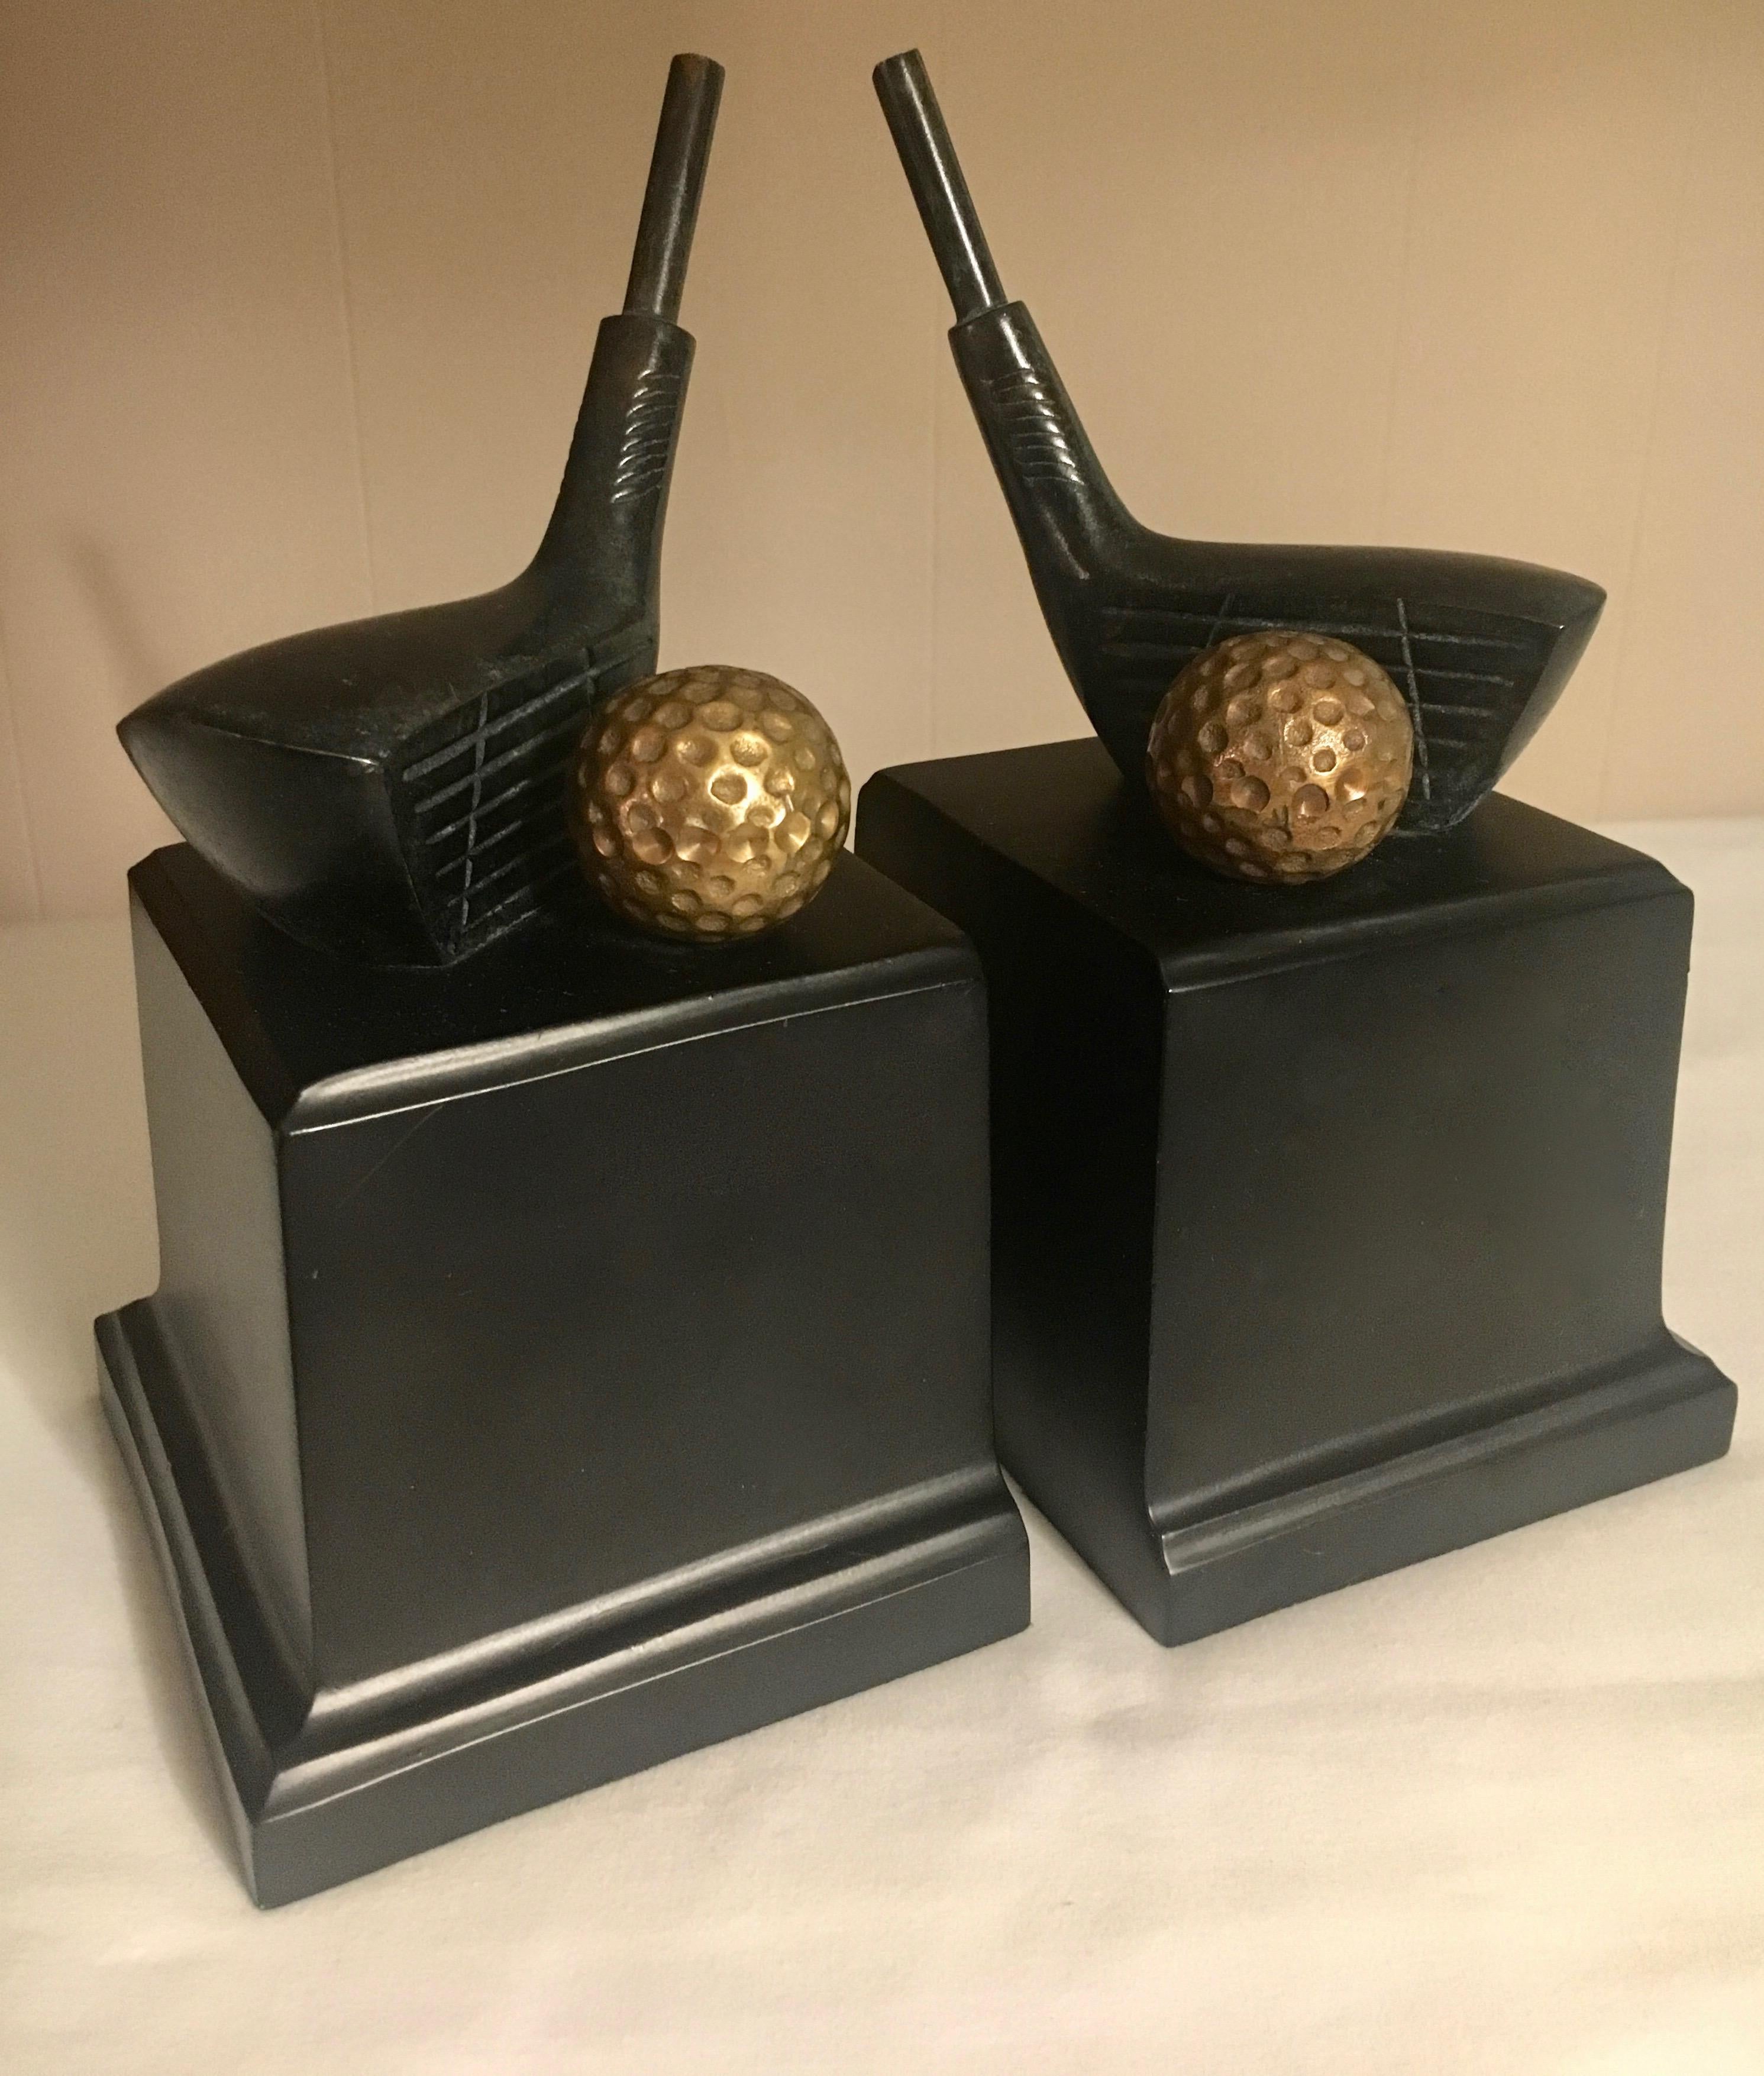 Pair of golf bookends - a handsome pair of bookends with a portion of a club with brass ball atop a wooden base. Great gift or decor for the golf aficionado.  Fathers day gifts too